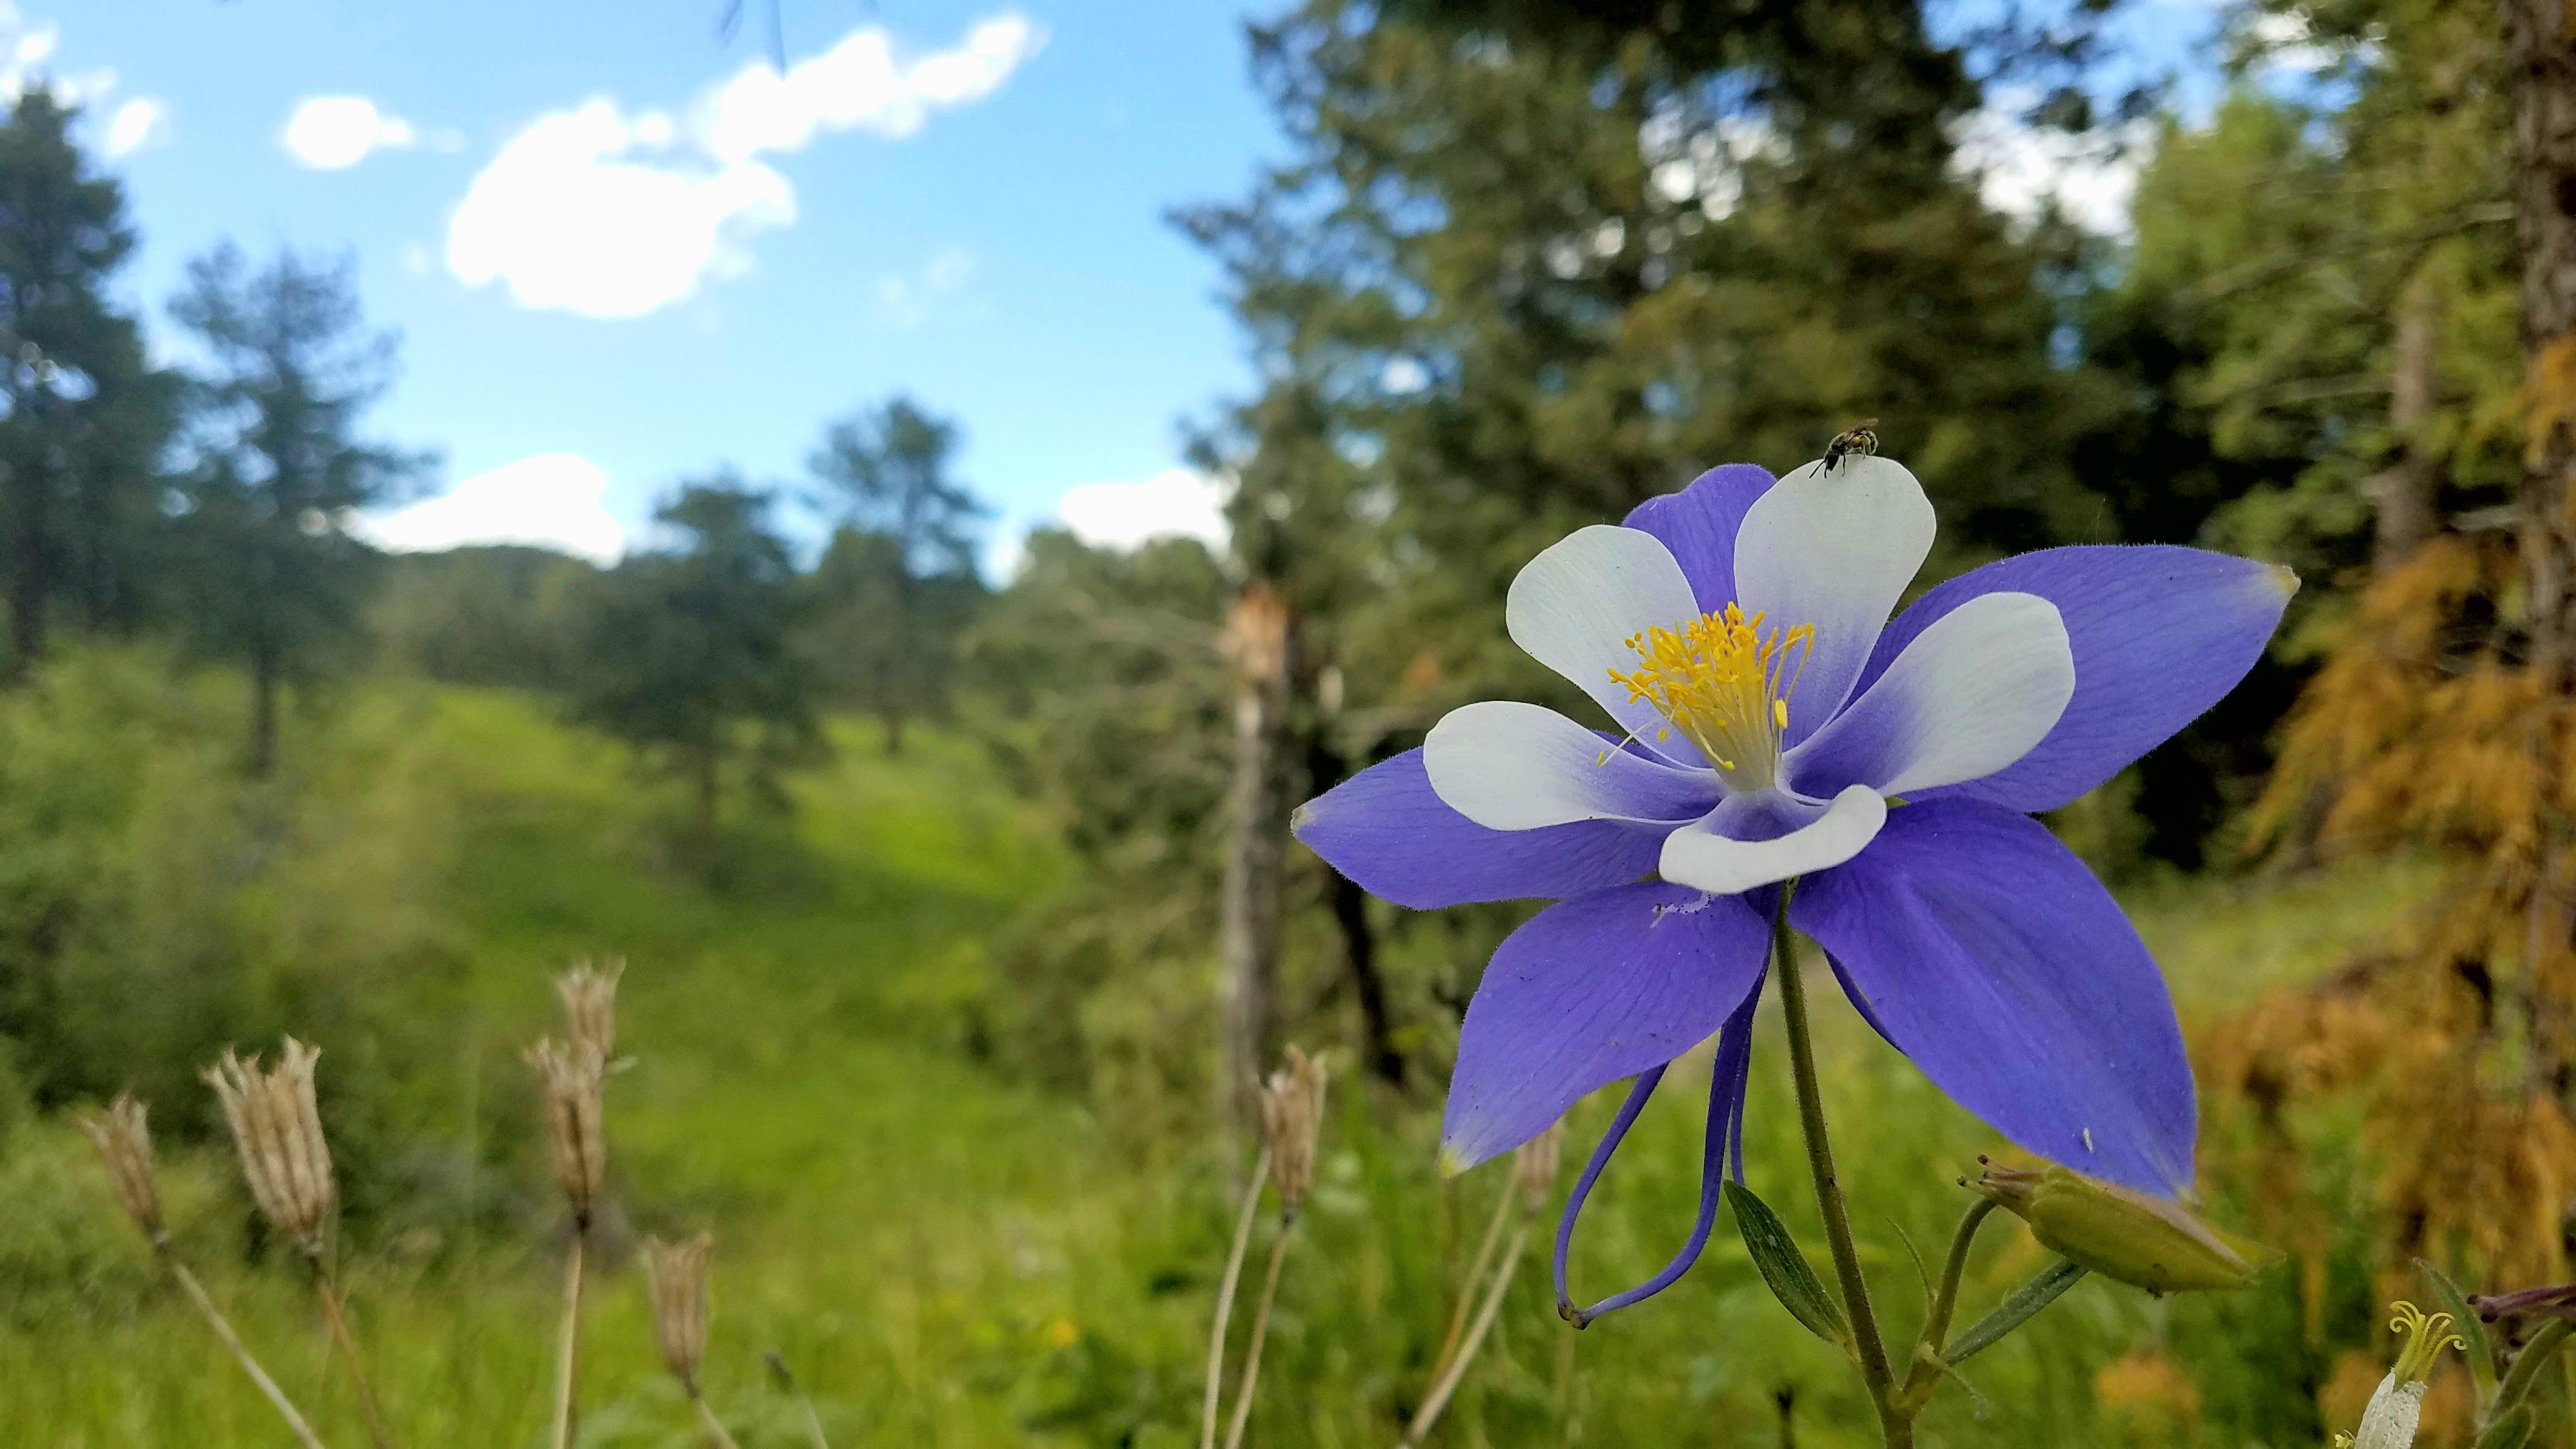 The Columbine flower: Colorado, USA's state flower growing in it's ...